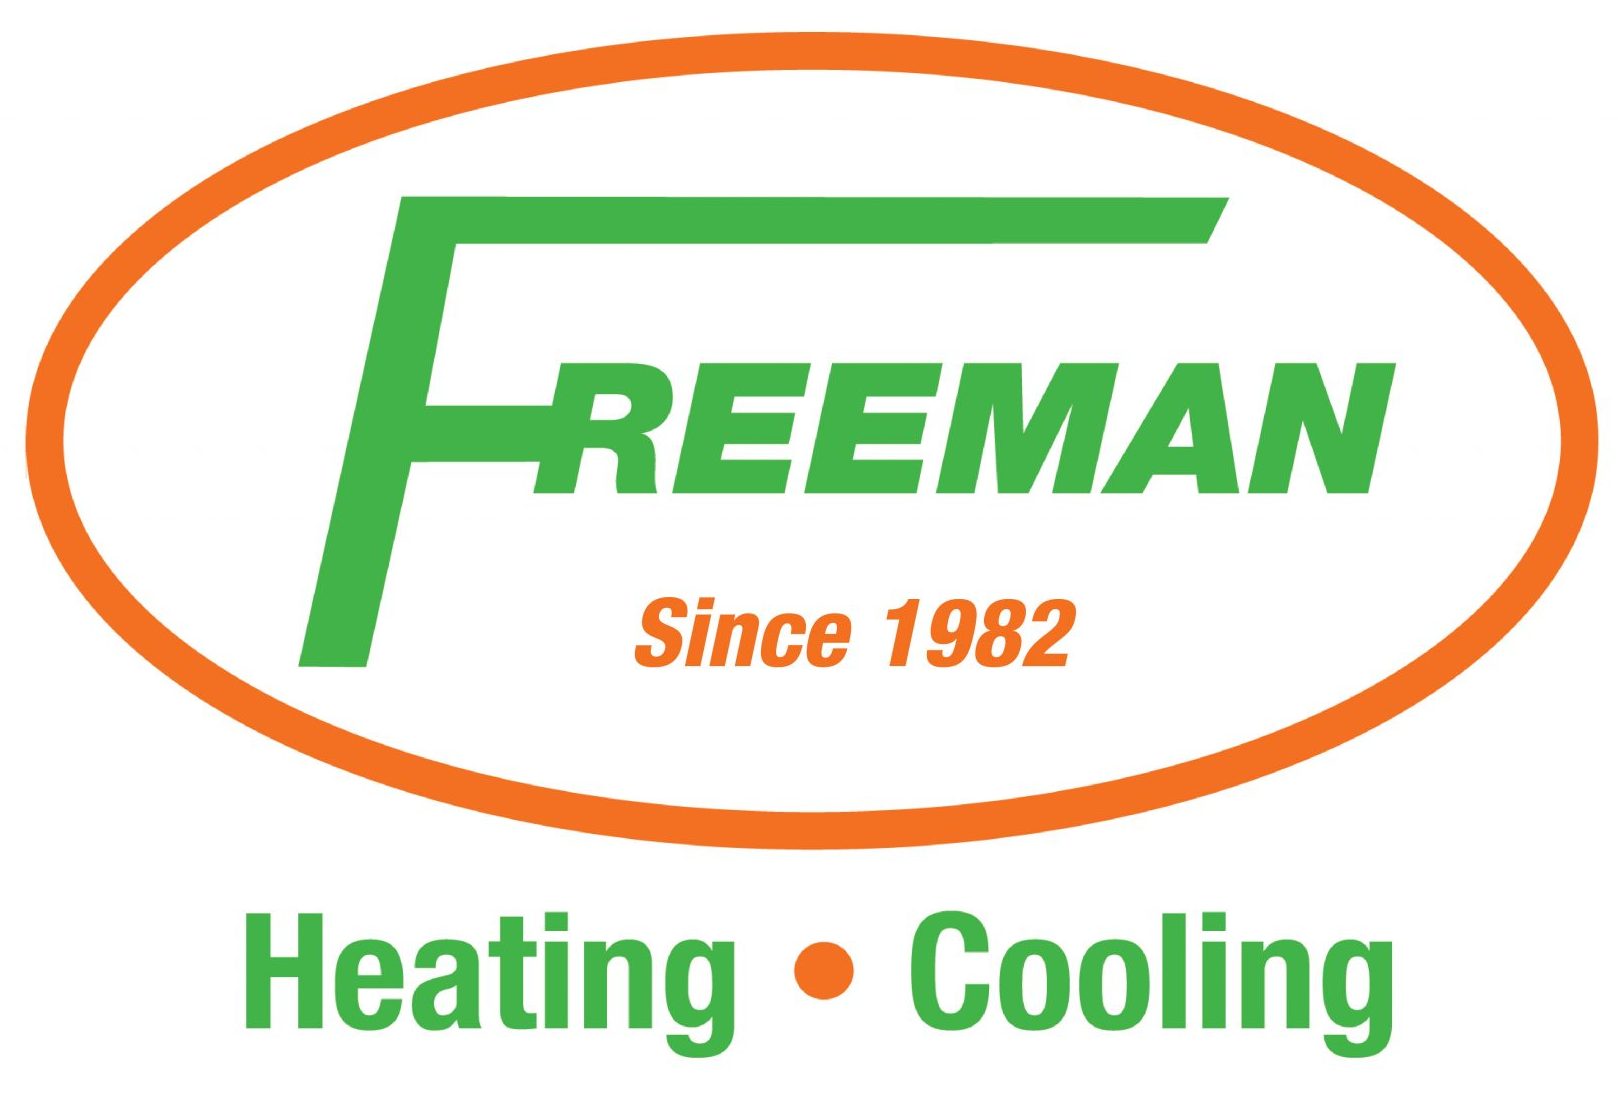 Freeman Heating and Cooling